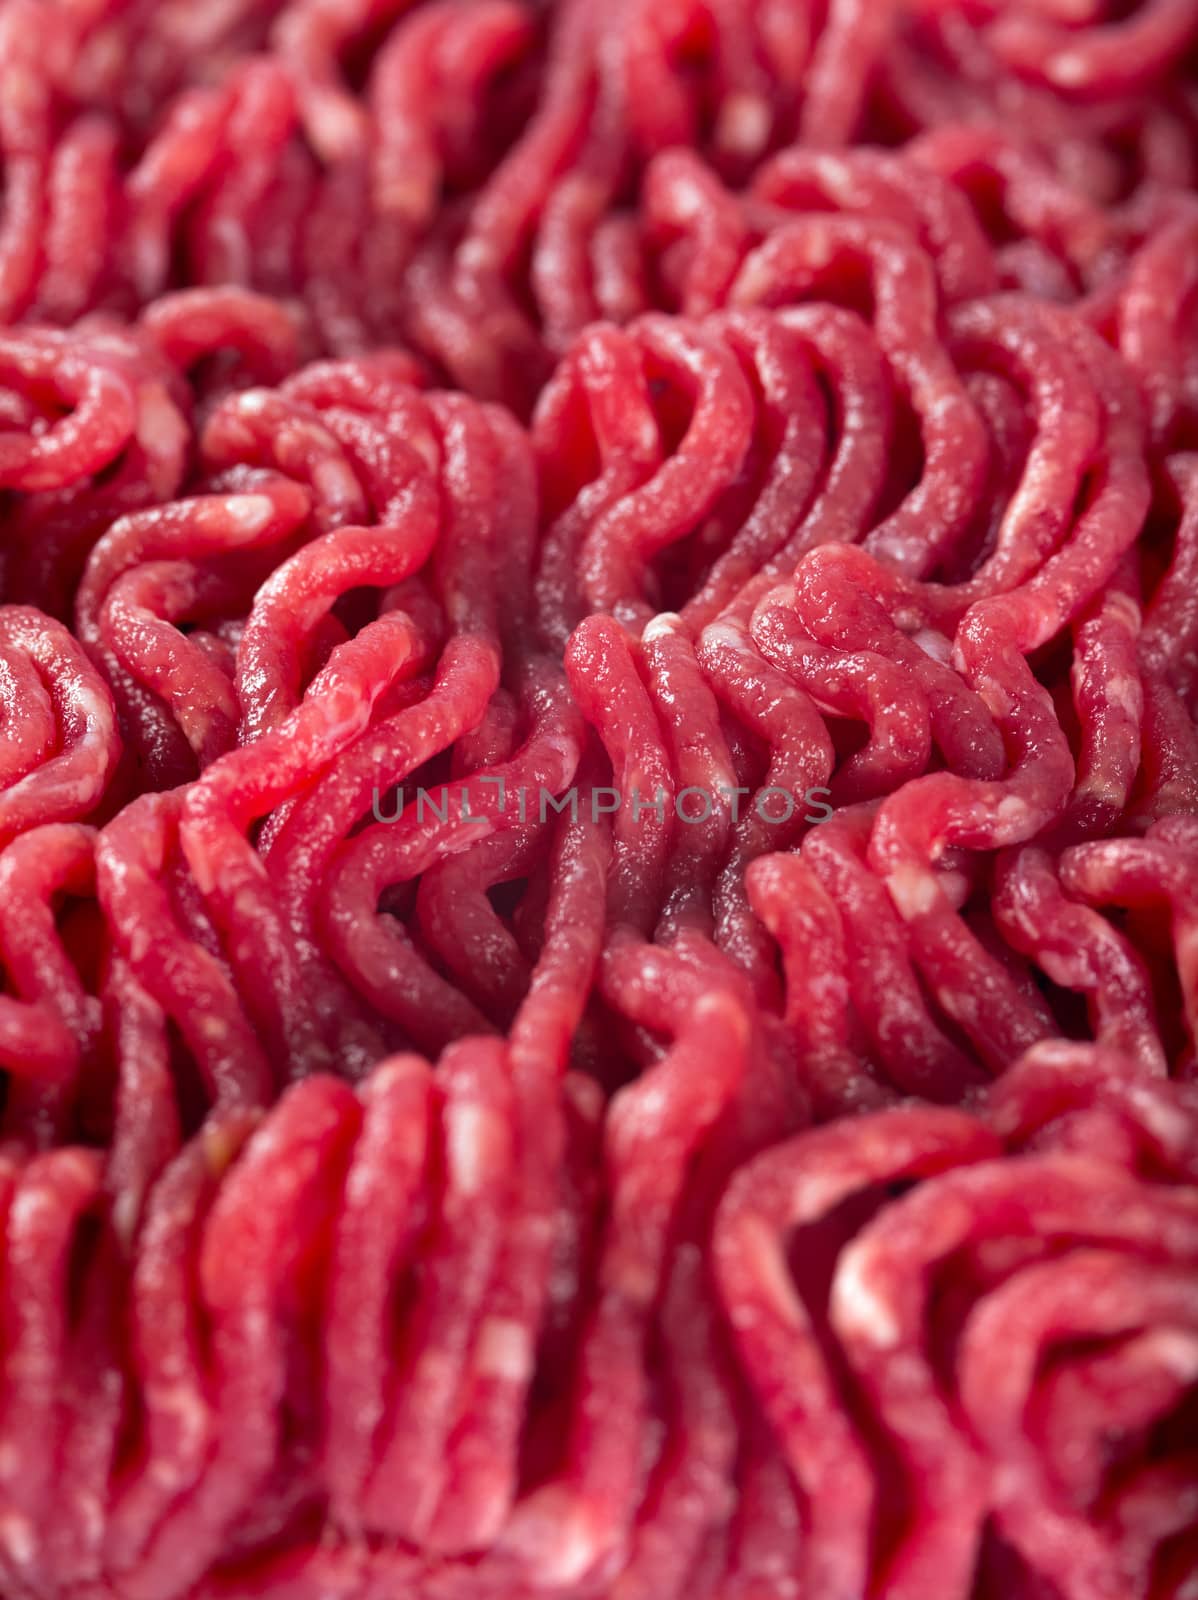 Macro photo of fresh ground beef. Focus through the middle of image.